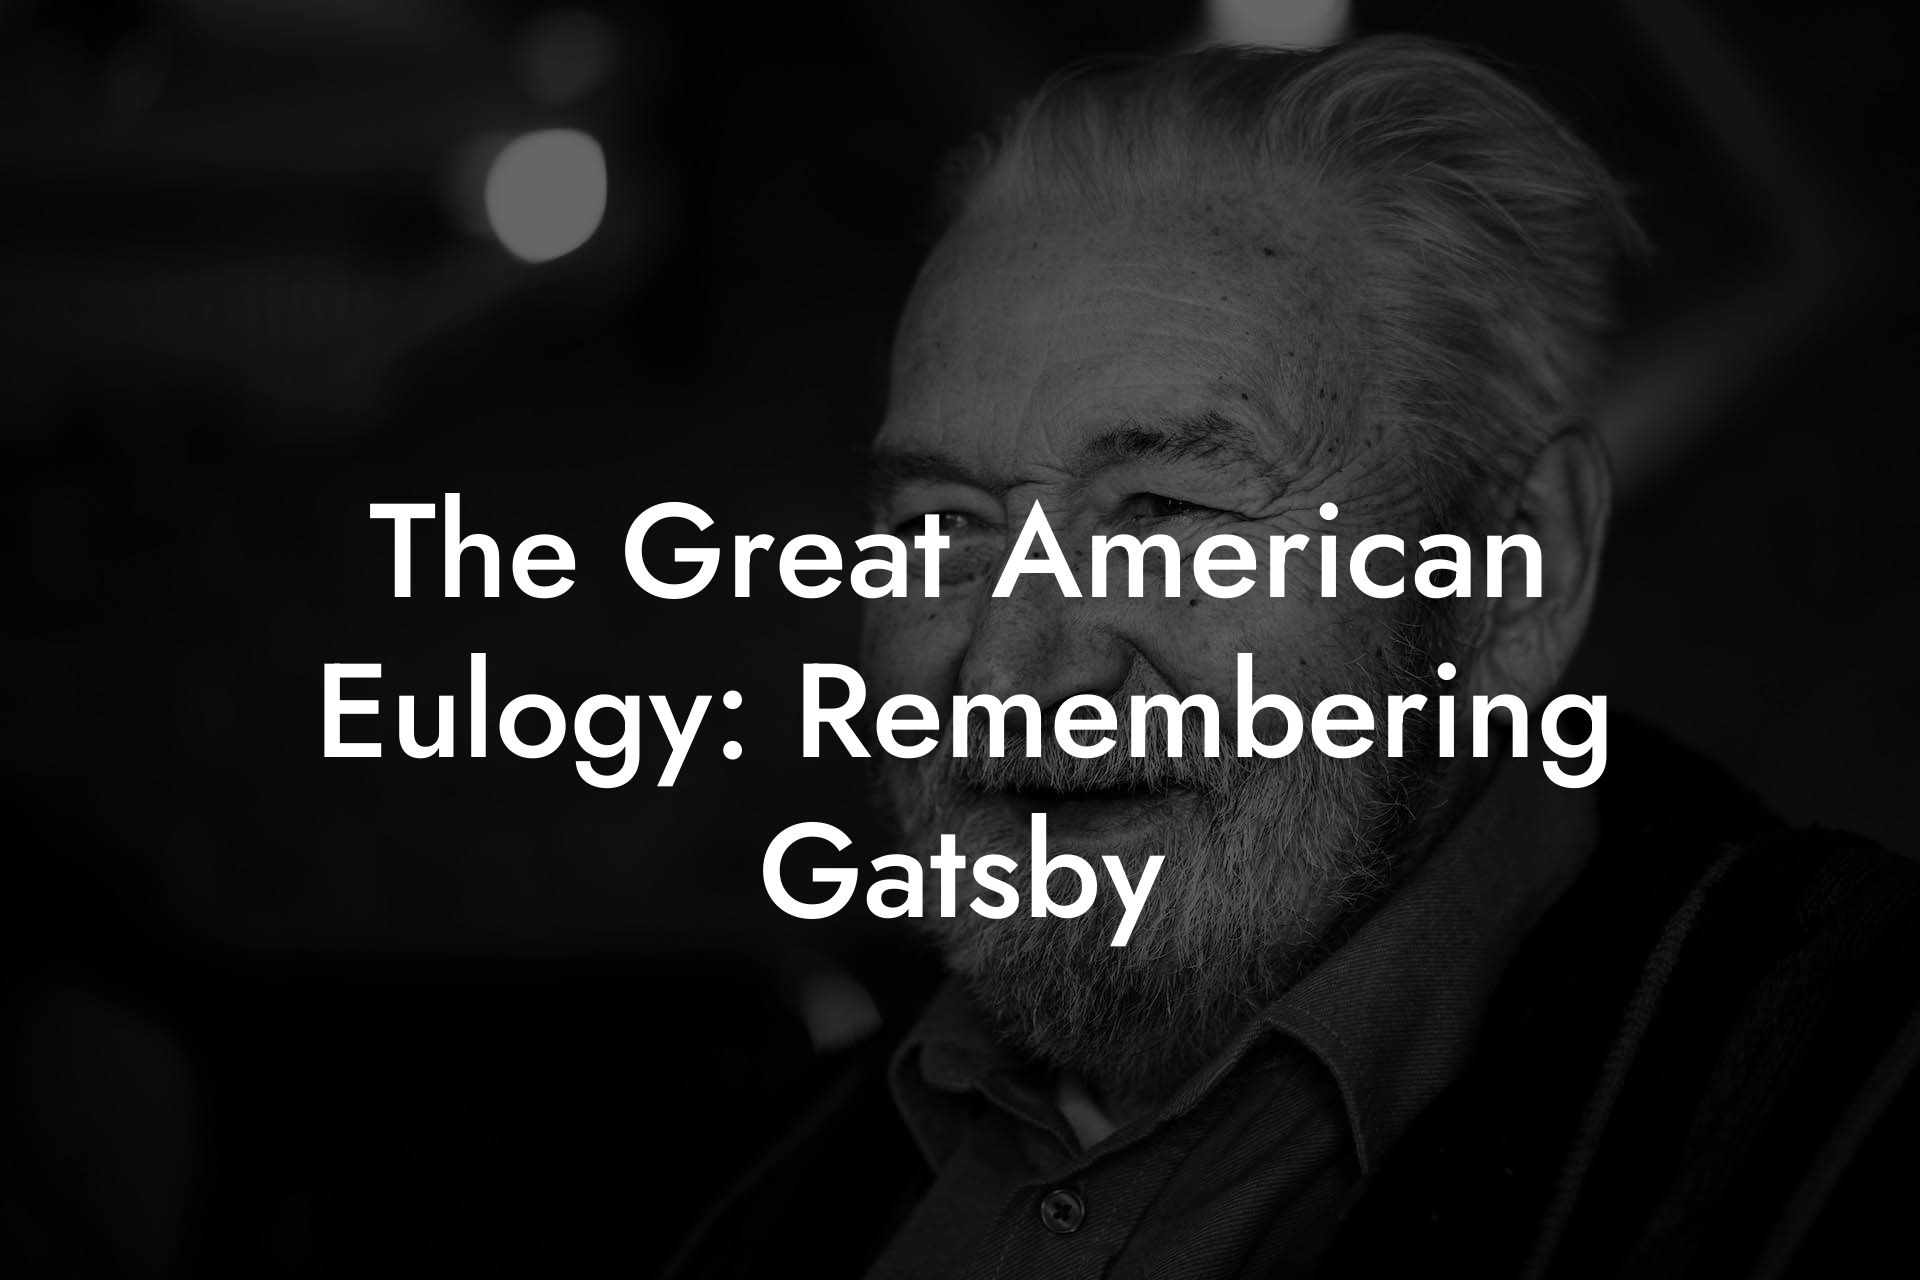 The Great American Eulogy: Remembering Gatsby